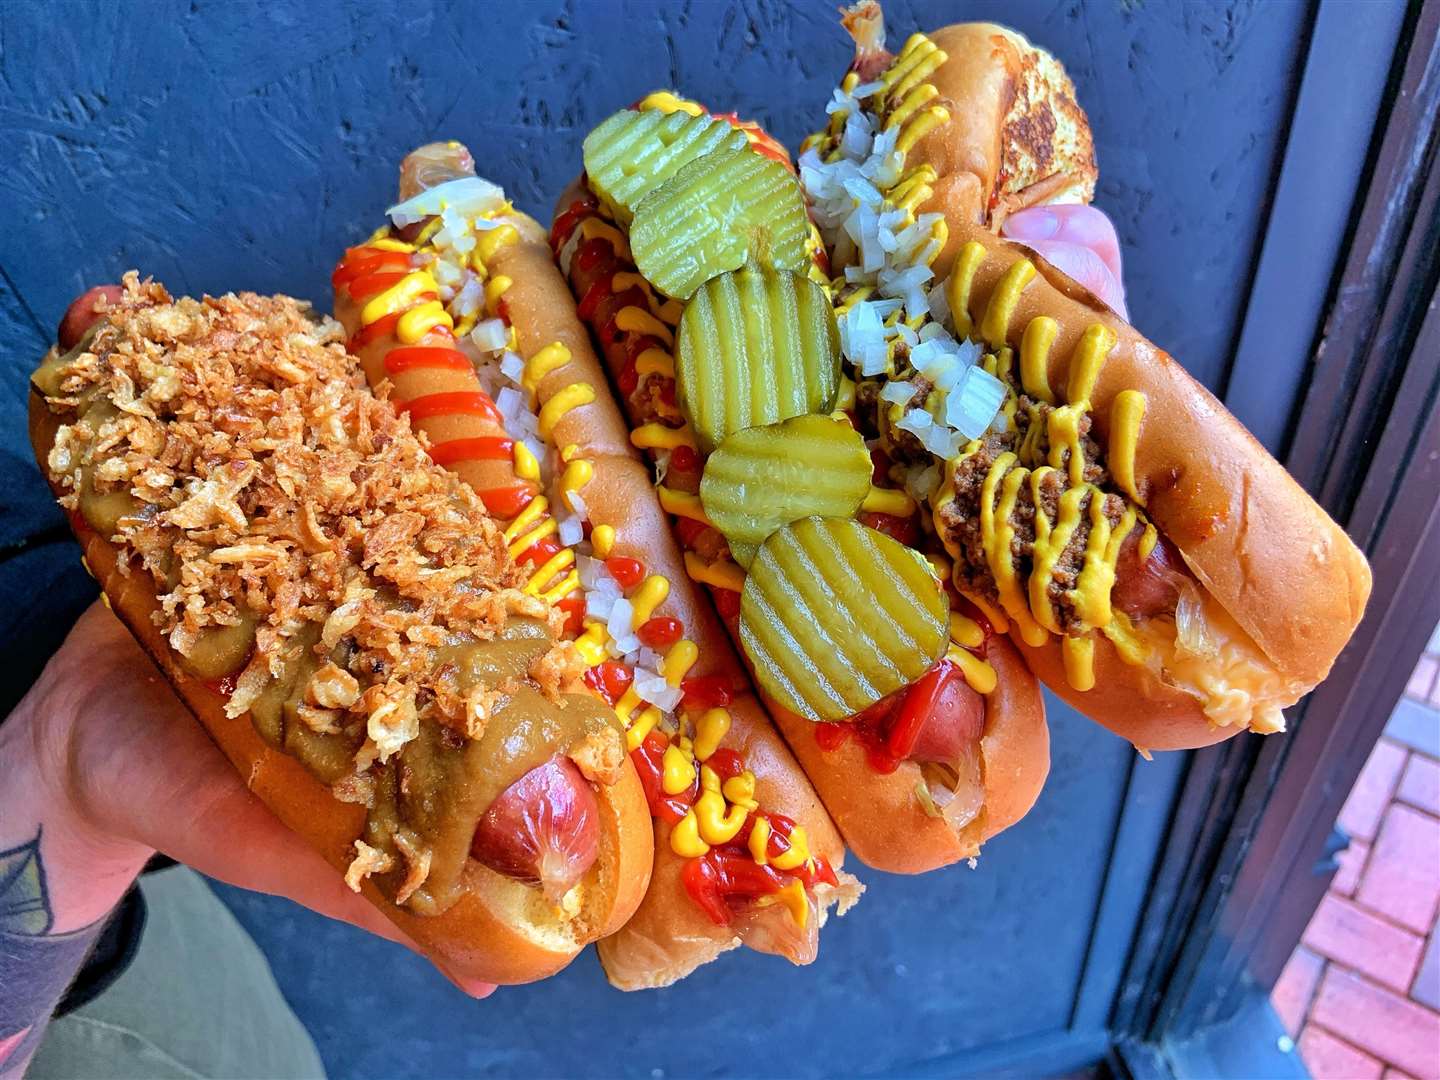 Hot dogs served up at 7Bone